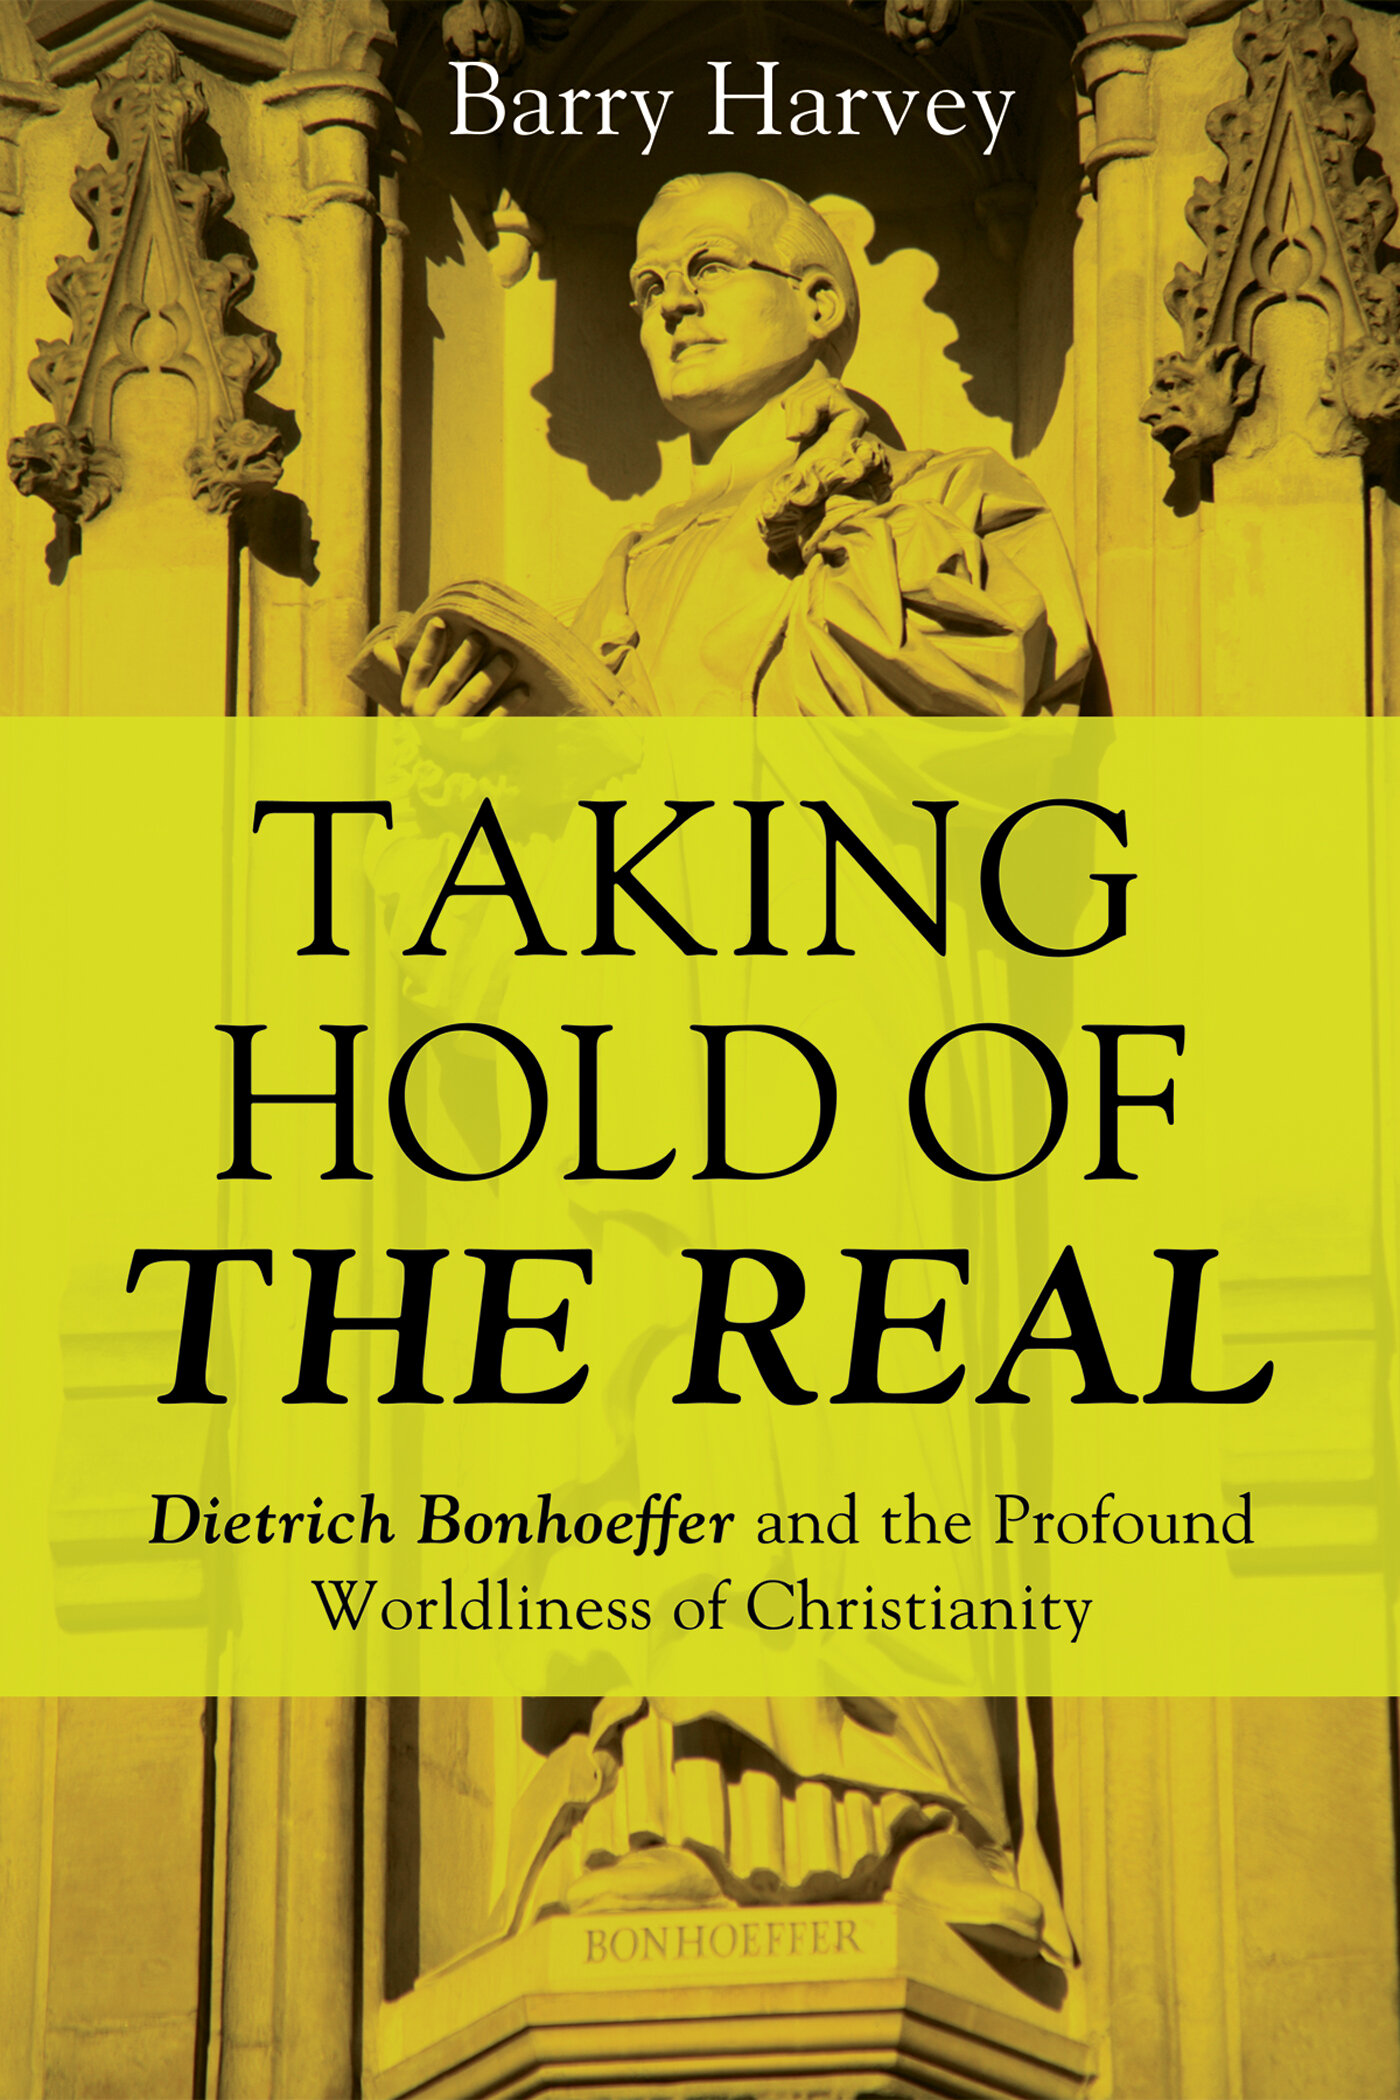 Taking Hold of the Real: Dietrich Bonhoeffer and the Profound Worldliness of Christianity